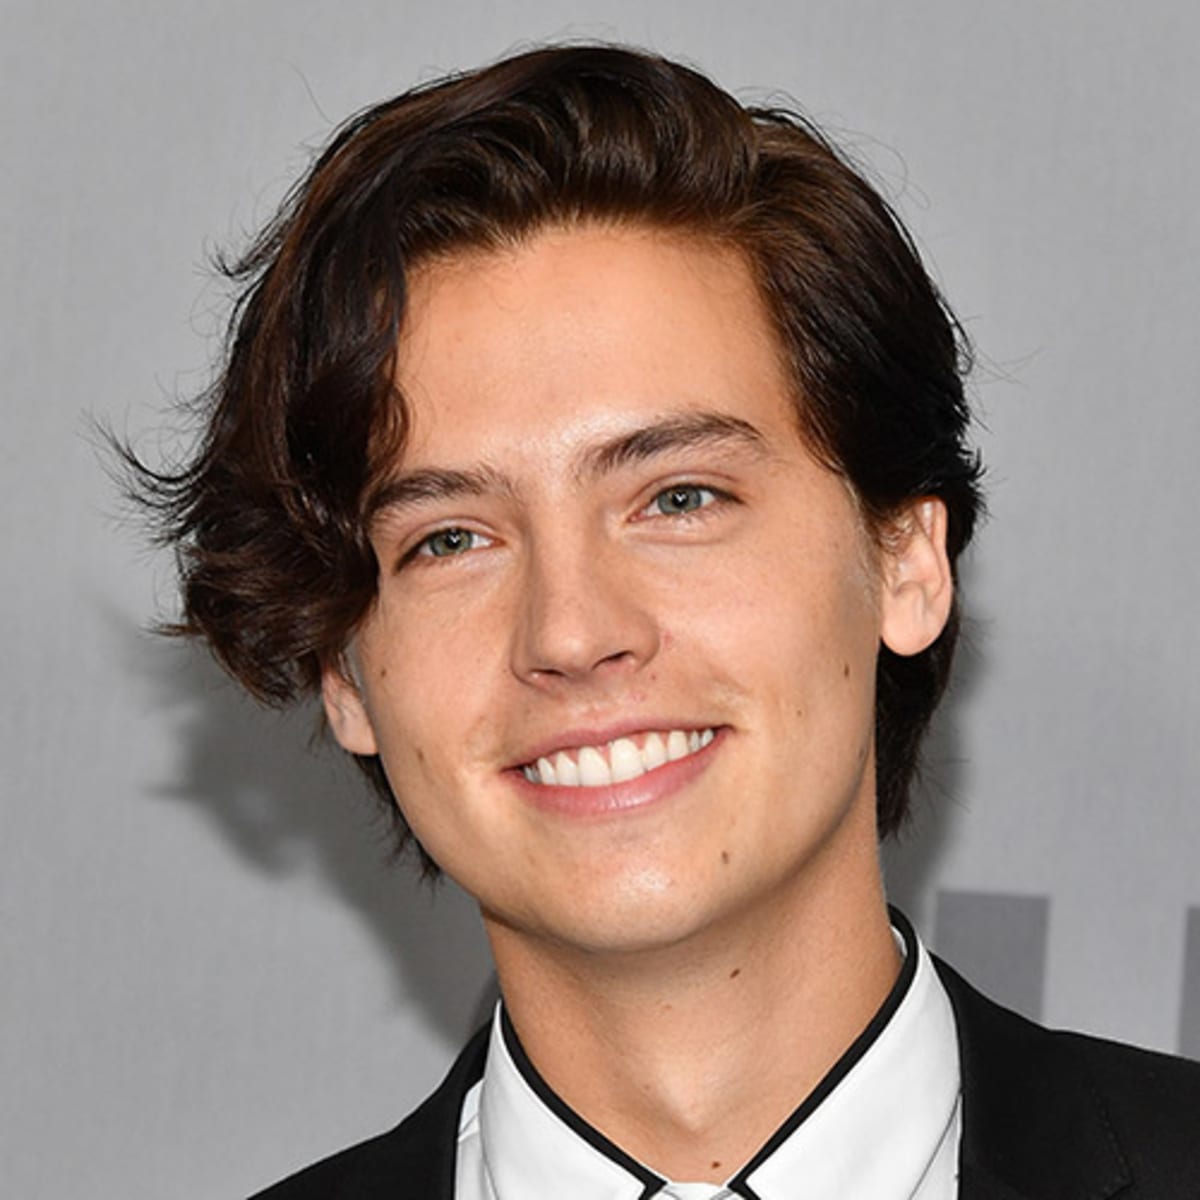 Cole Sprouse wearing a black and white suit and attending an event